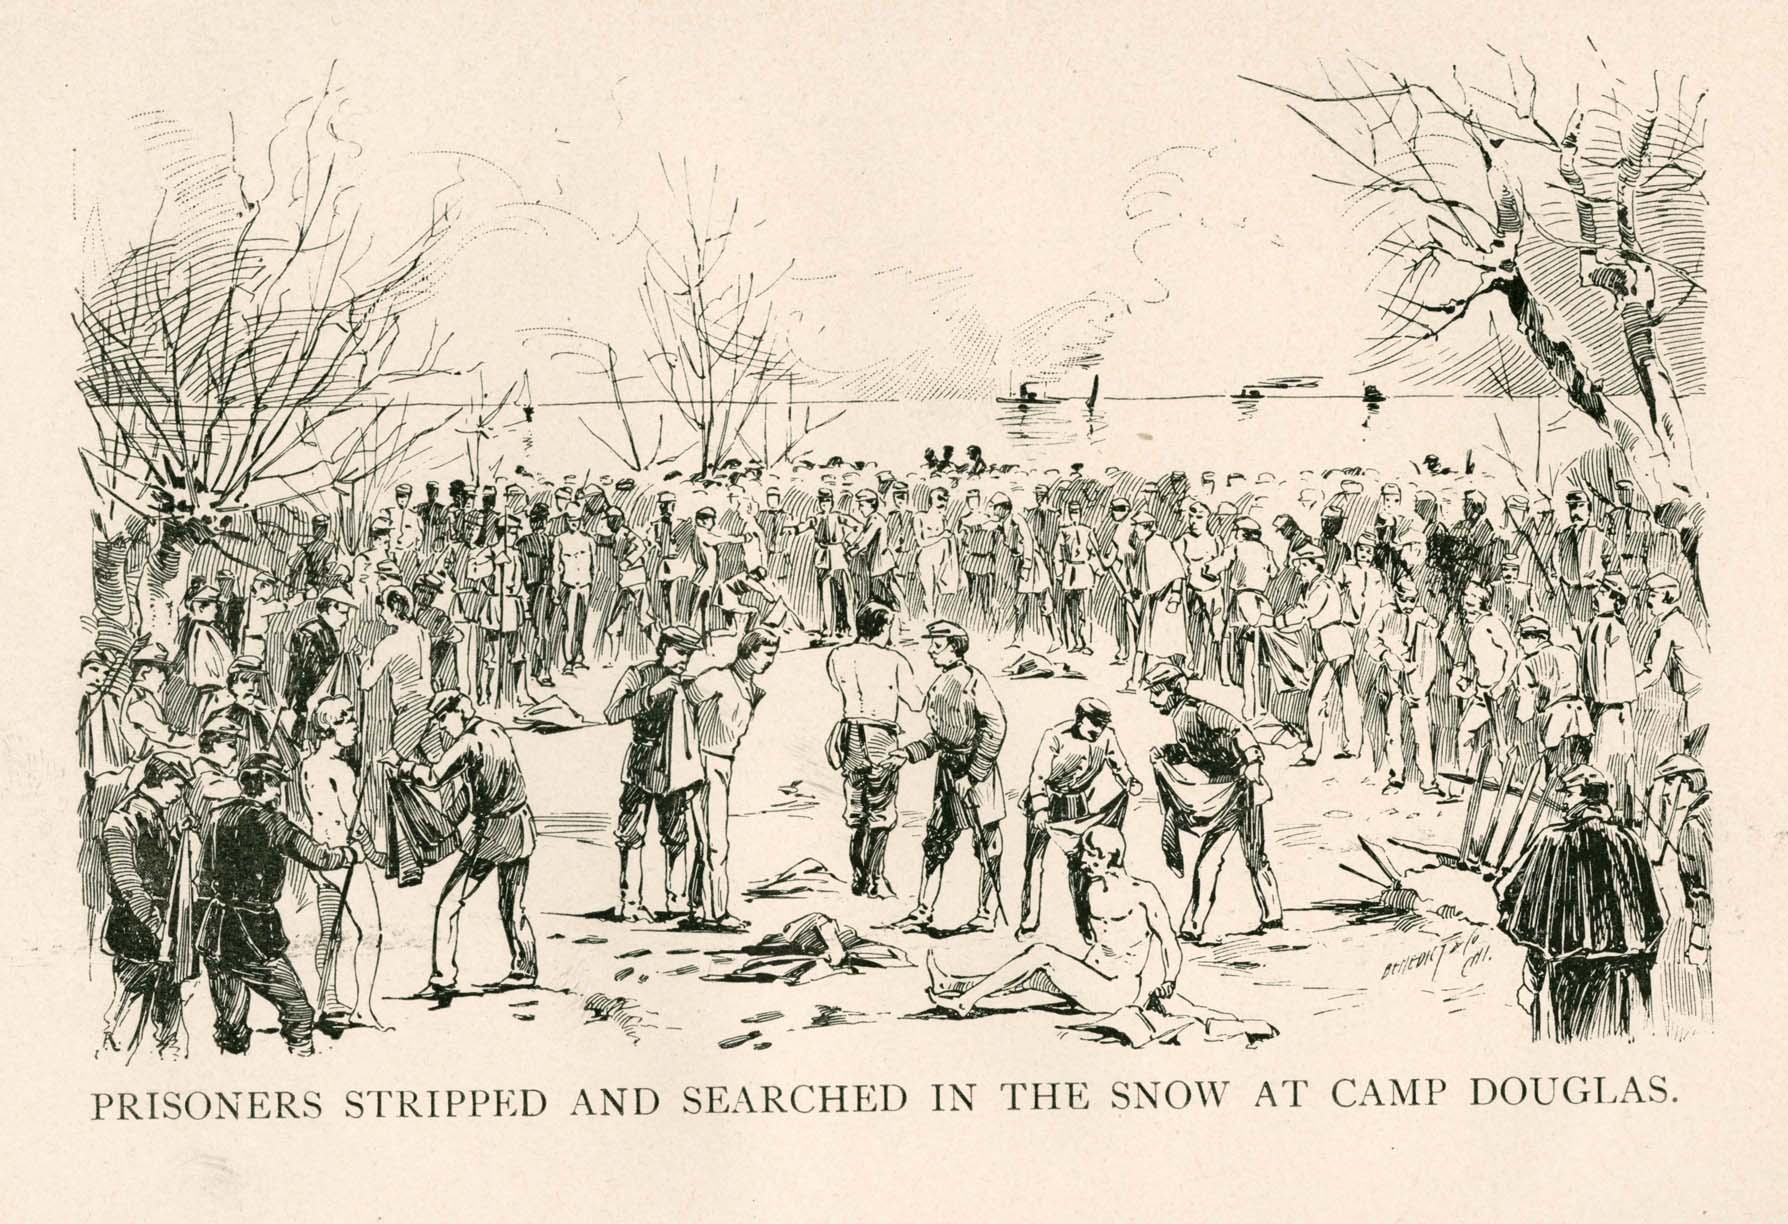 Prisoners Stripped and Searched in the Snow at Camp Douglas, 1893, engraving from John M. Copley, A Sketch of the Battle of Franklin, Tenn; with Reminiscences of Camp Douglas, Austin, Texas: Eugene Von Boekmann, 1893, p. 76 (Newberry Library)